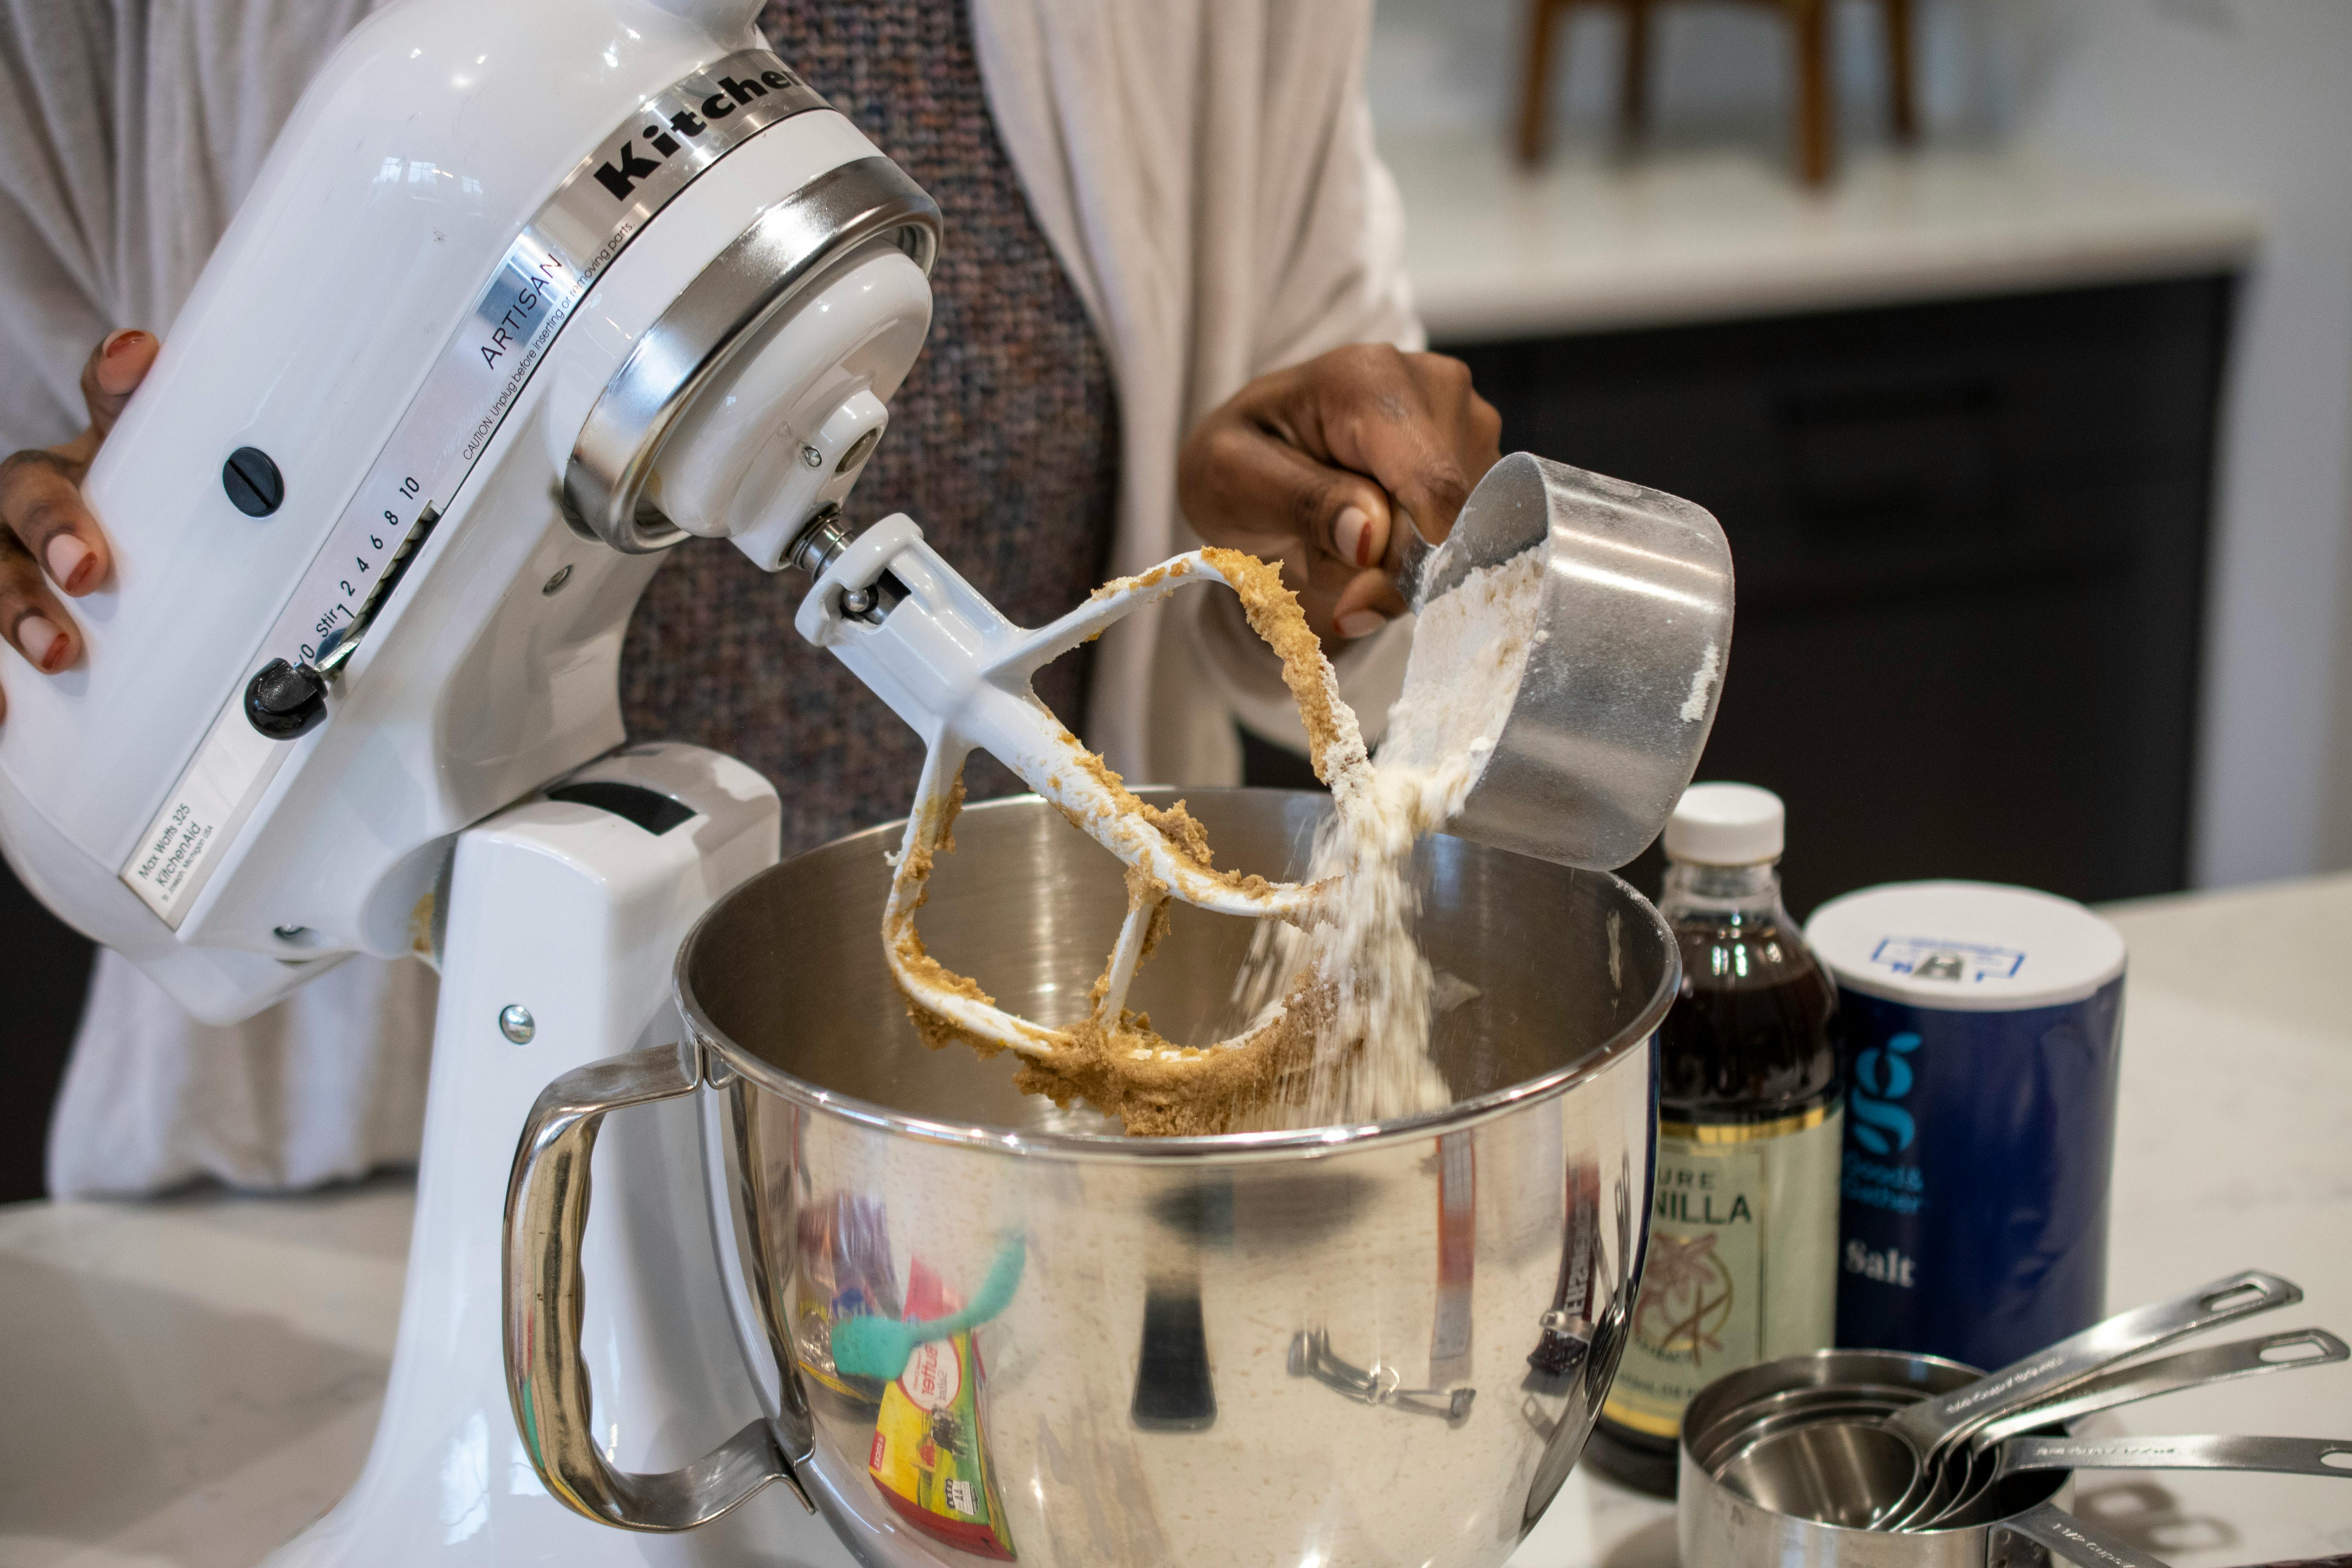 Fact check: False claim of a KitchenAid recall for high lead levels